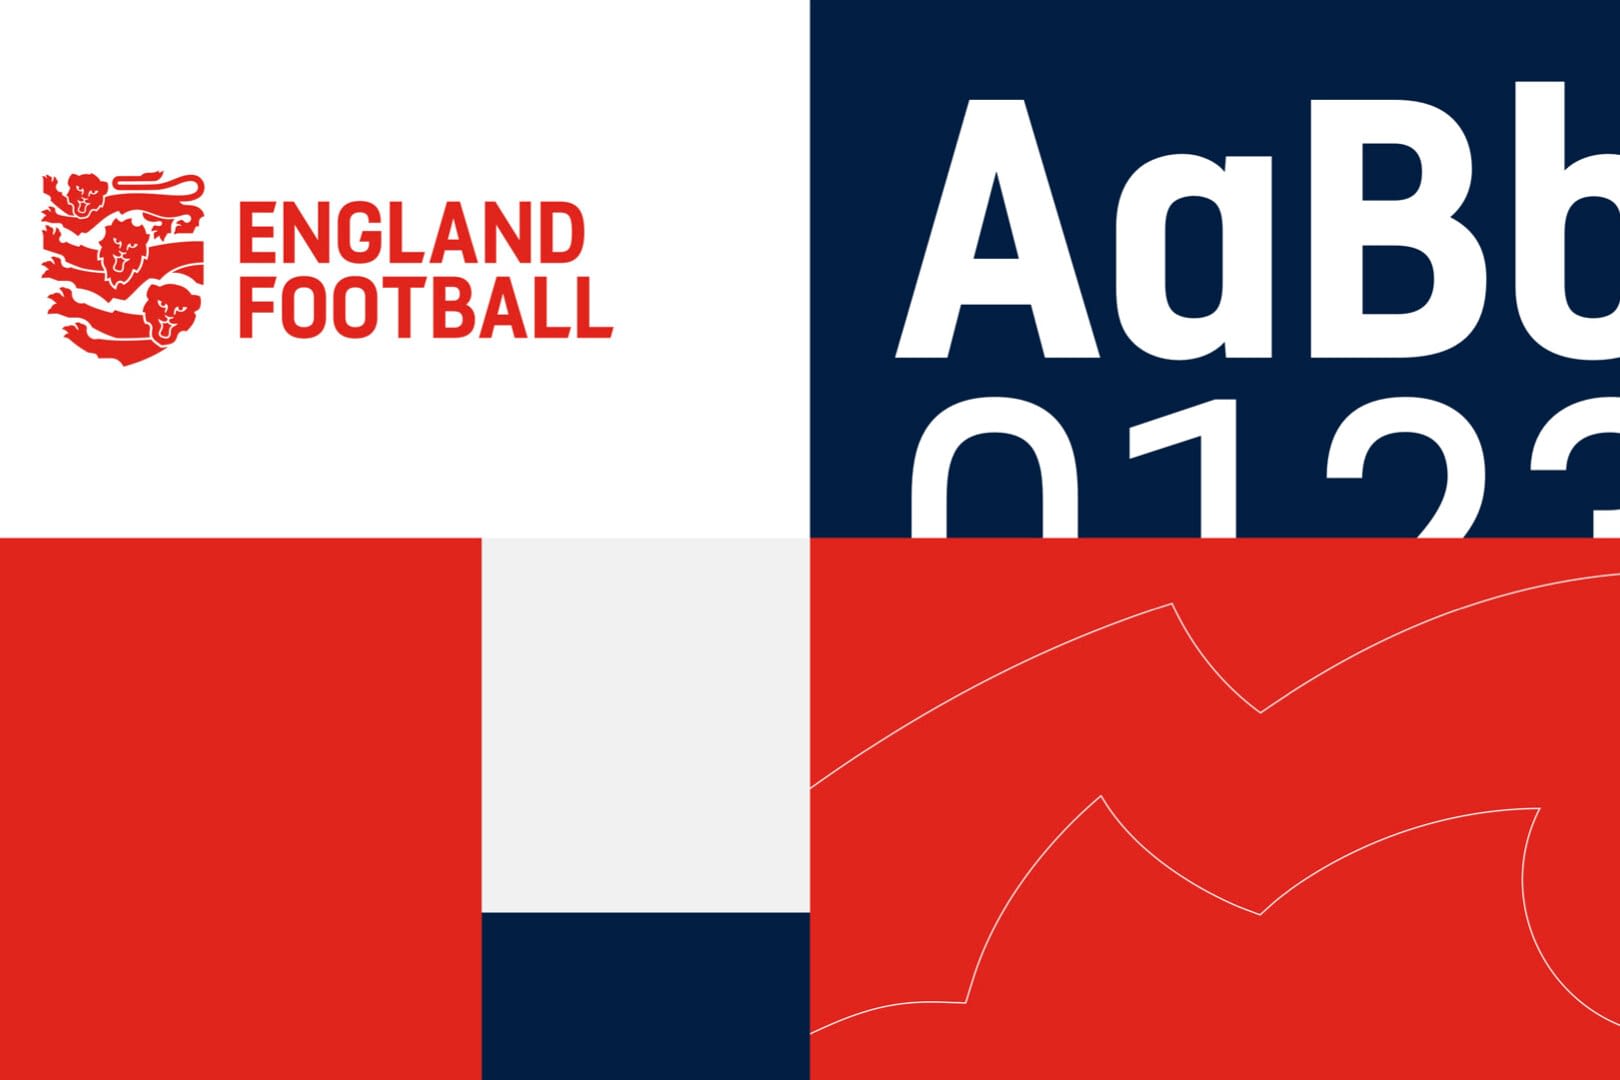 three lions redesign brand style guide